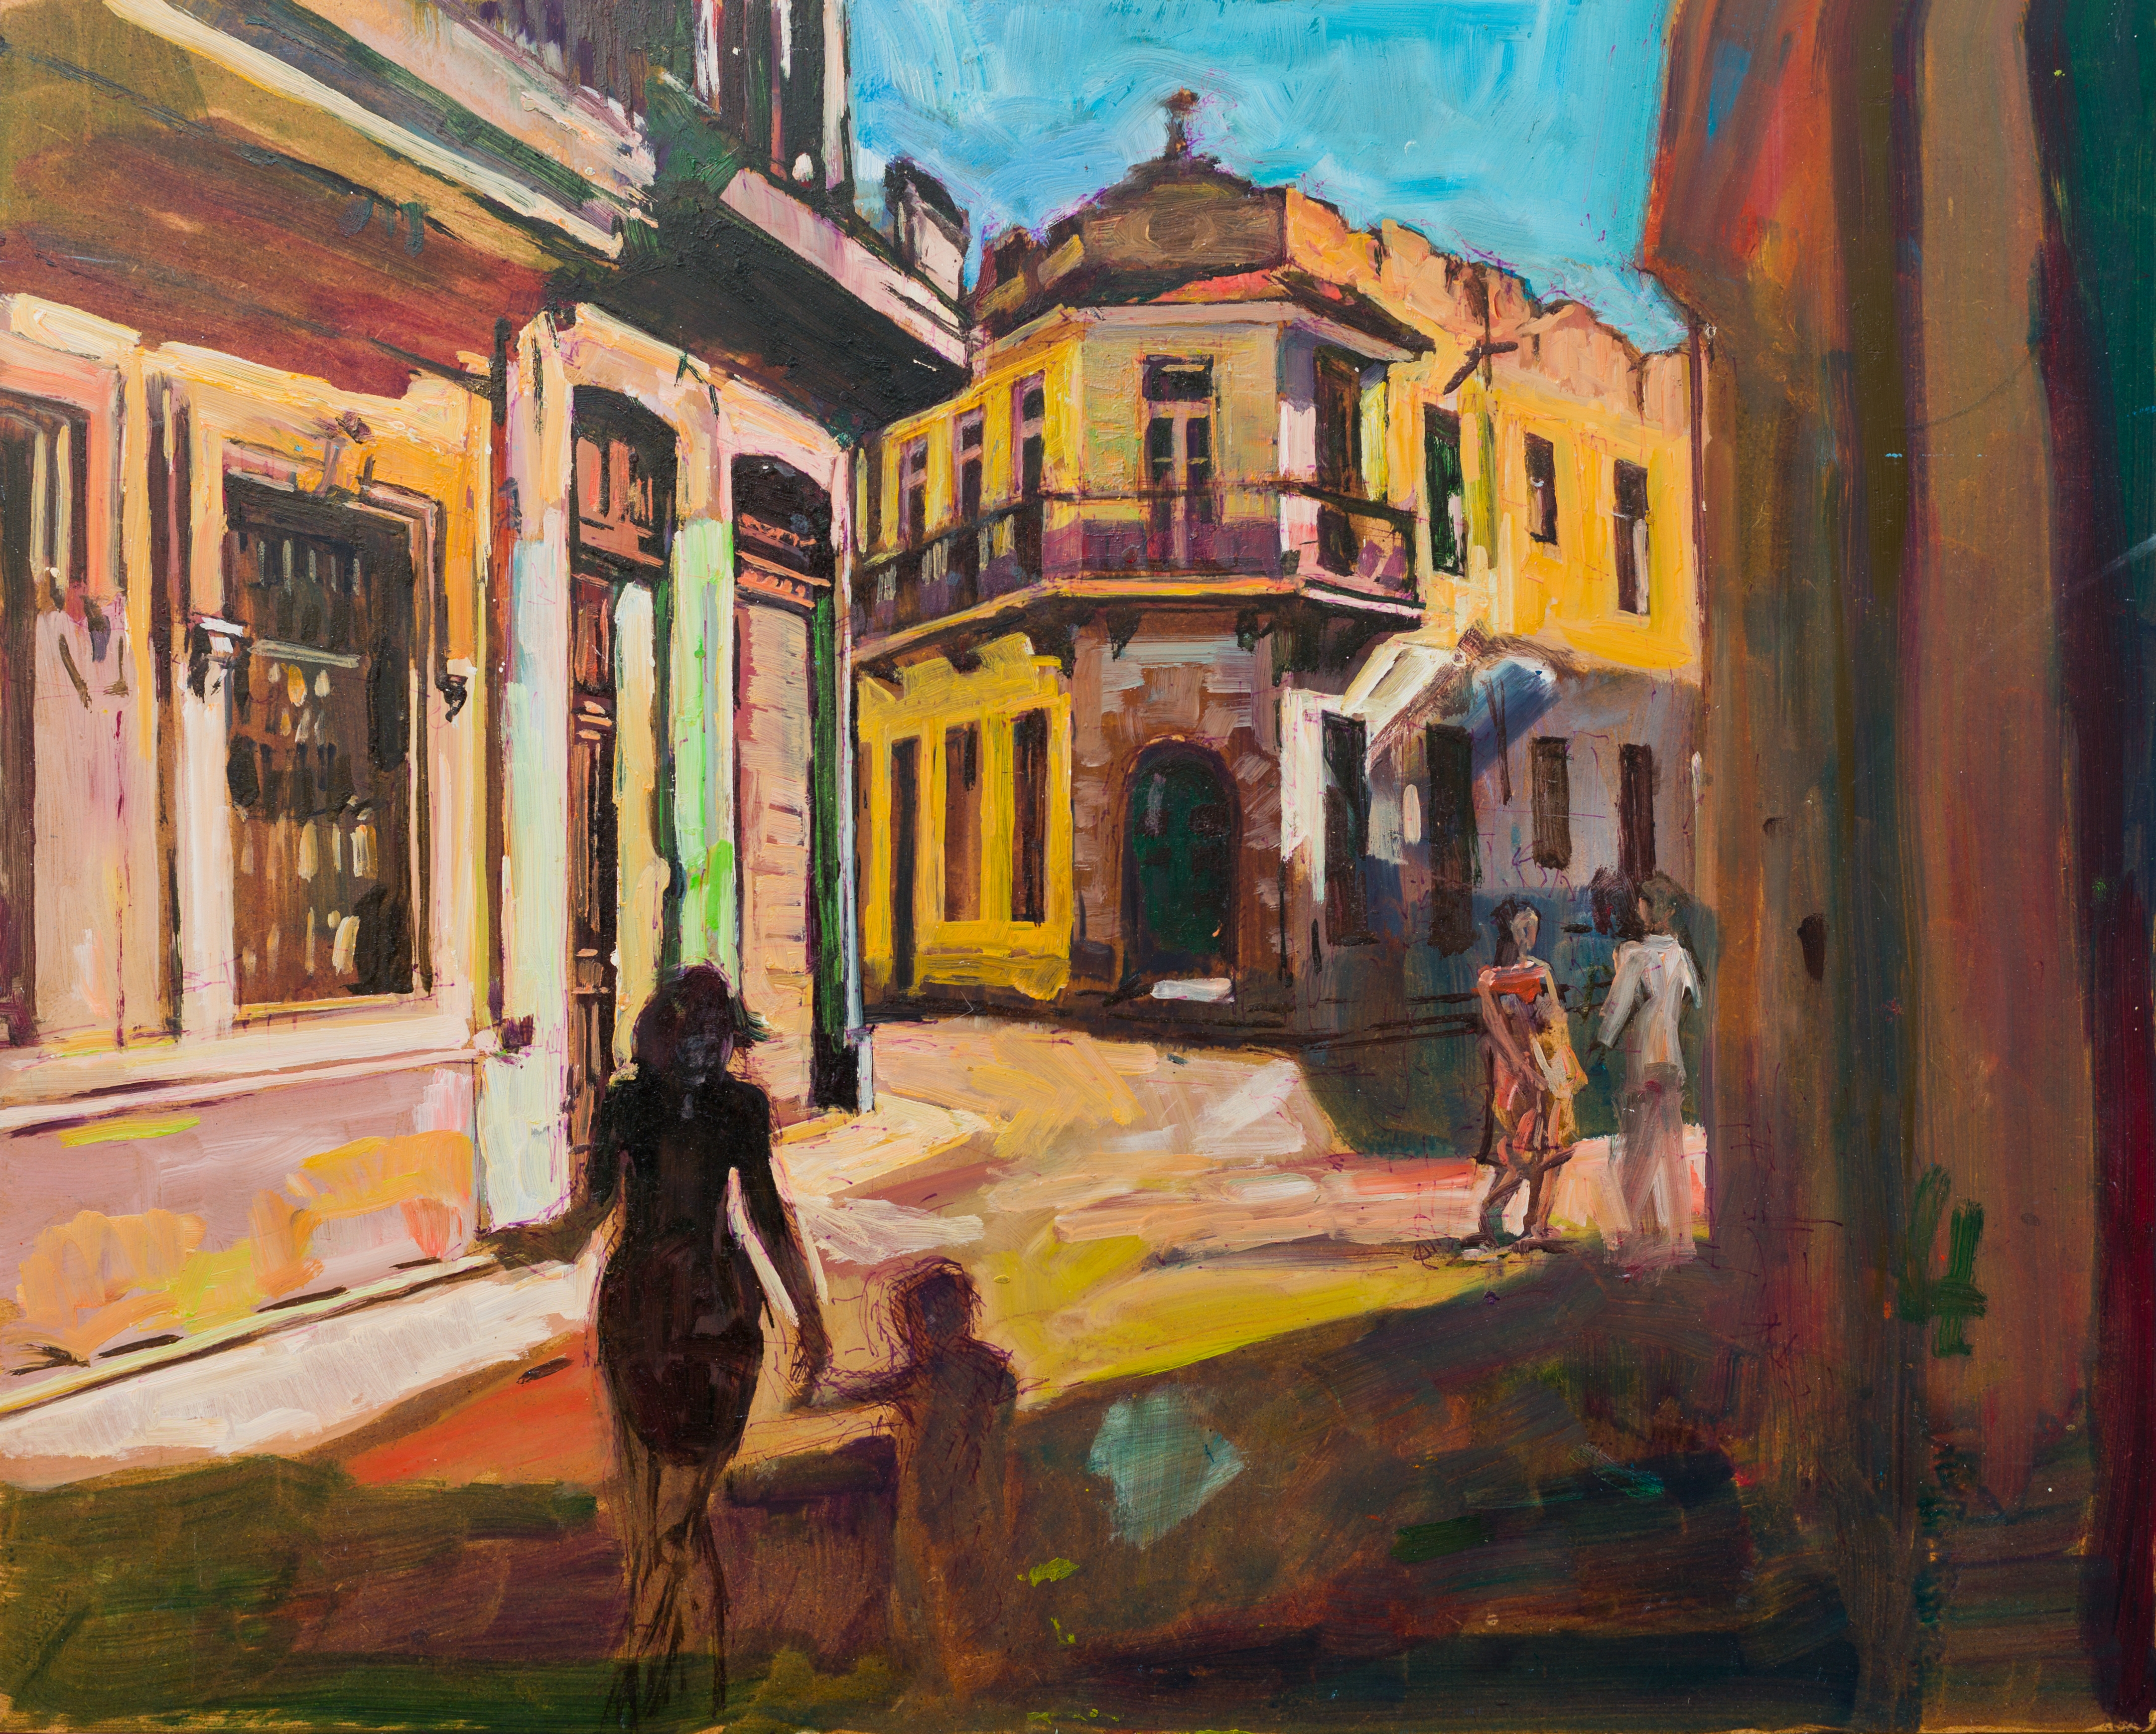 painting depicting a street in Cuba